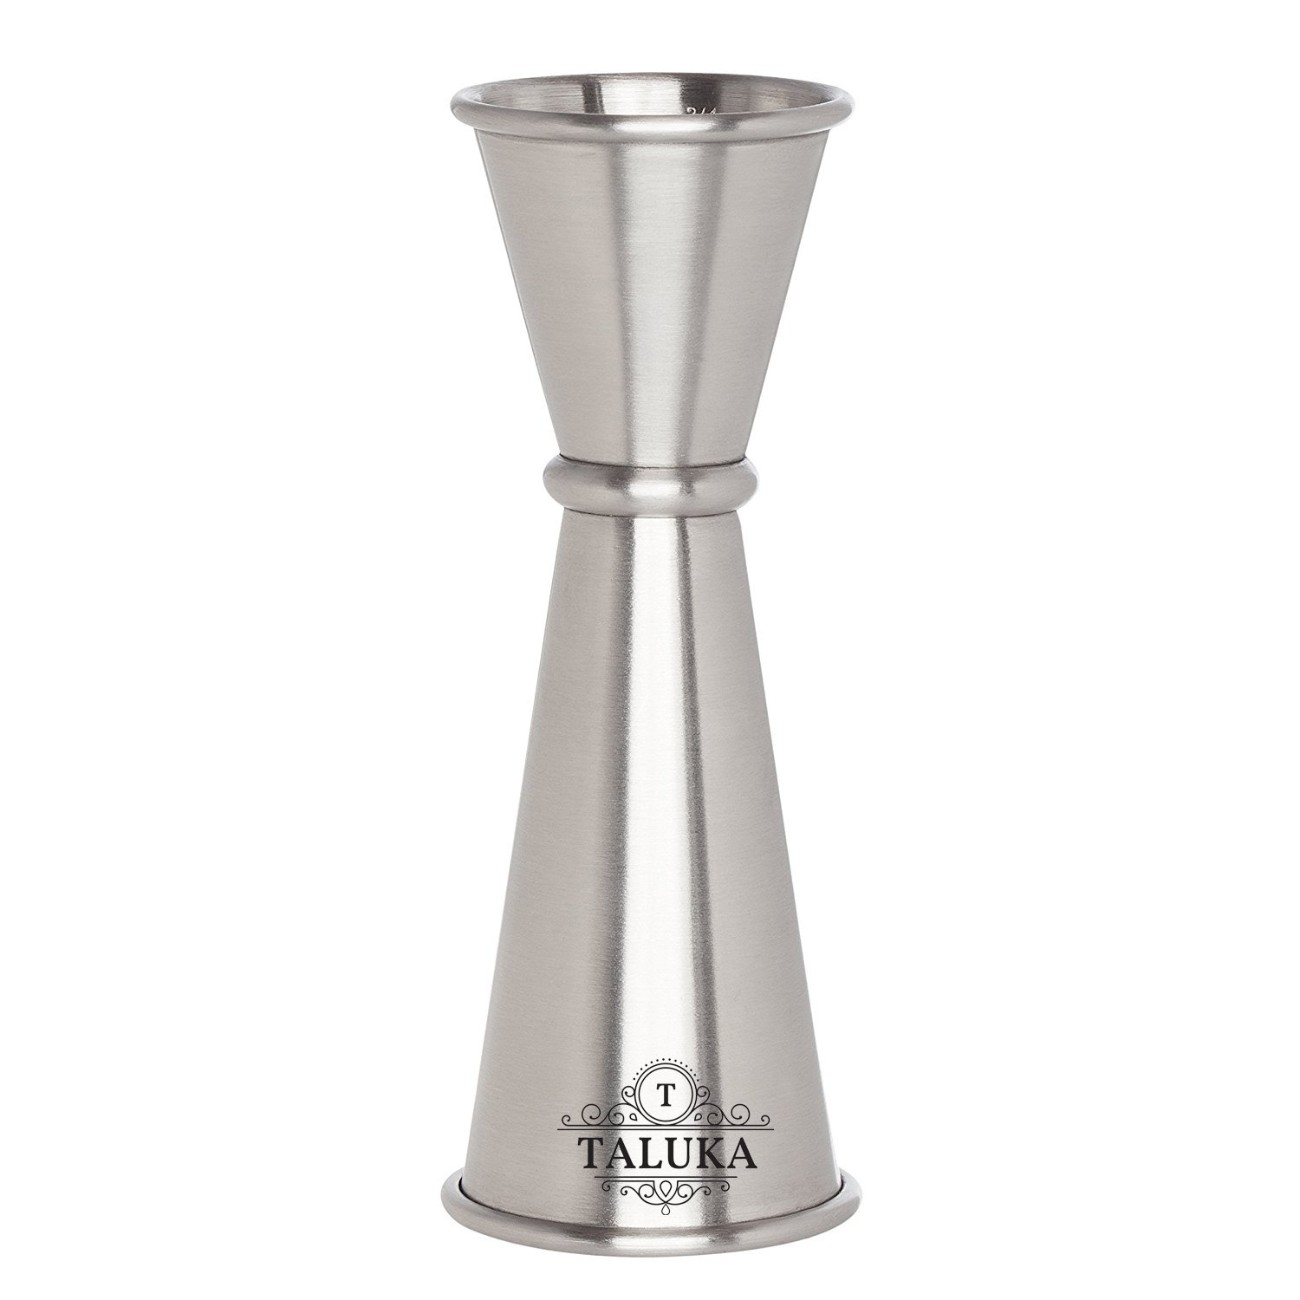 Stainless Steel Double Side Peg & Cocktail Shaker Drink Measuring tool